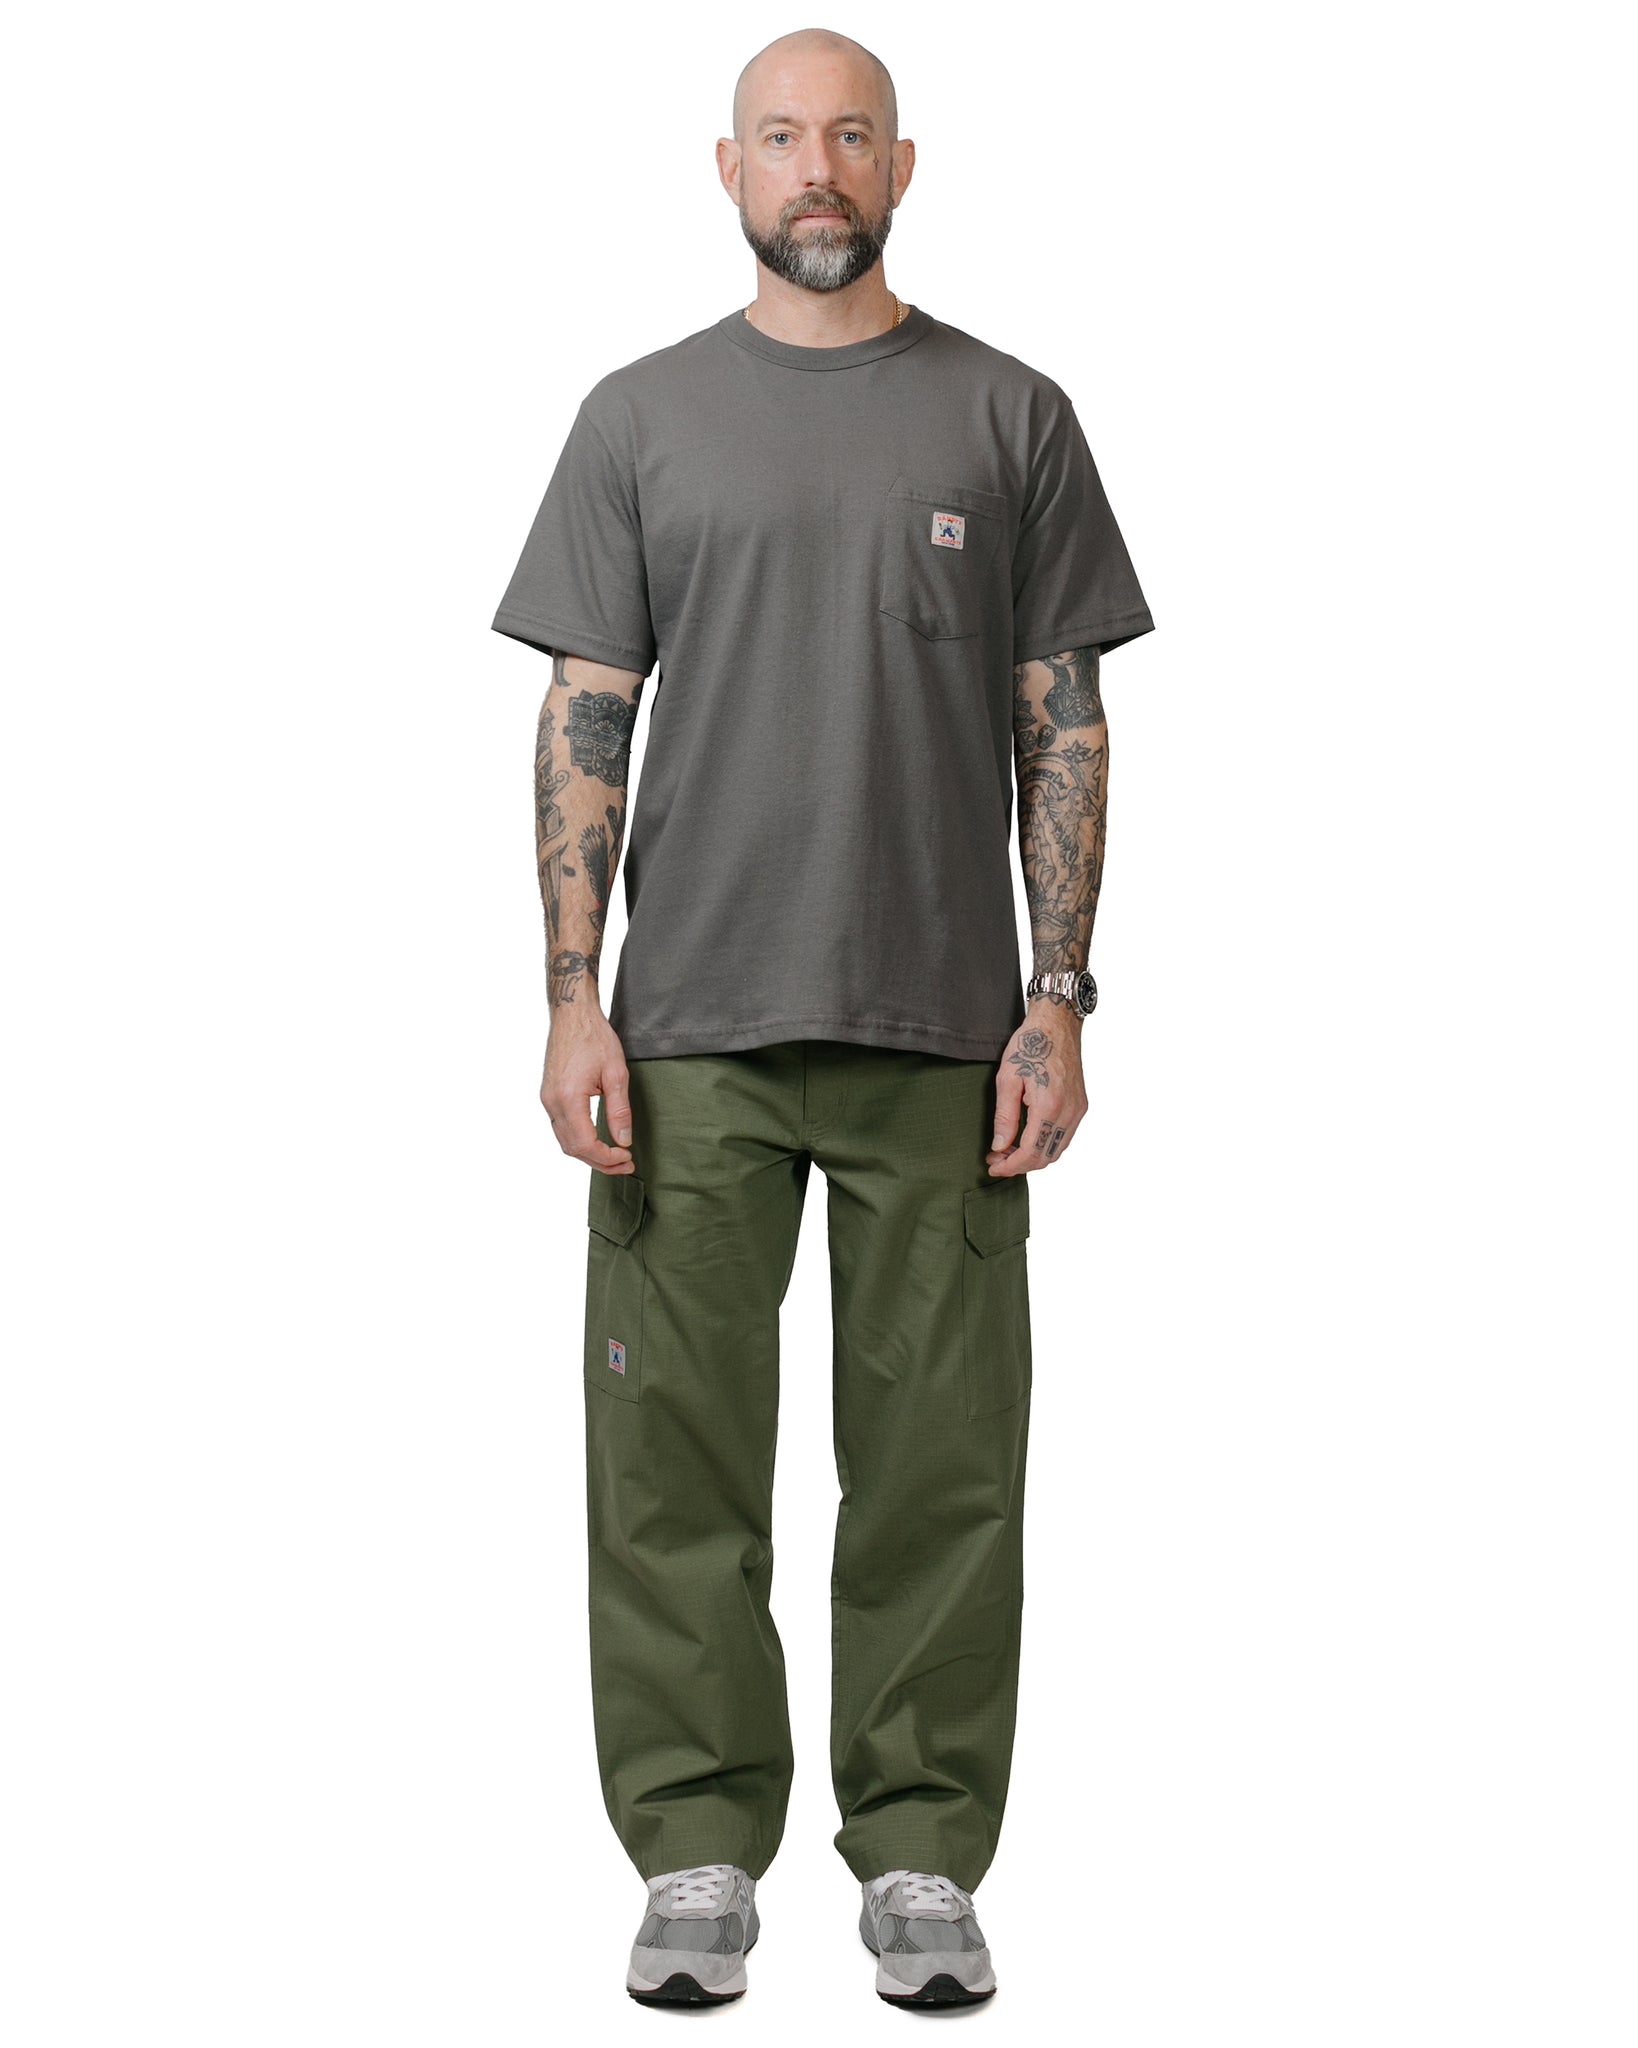 Randy's Garments Cargo Pant Cotton Ripstop Olive model full